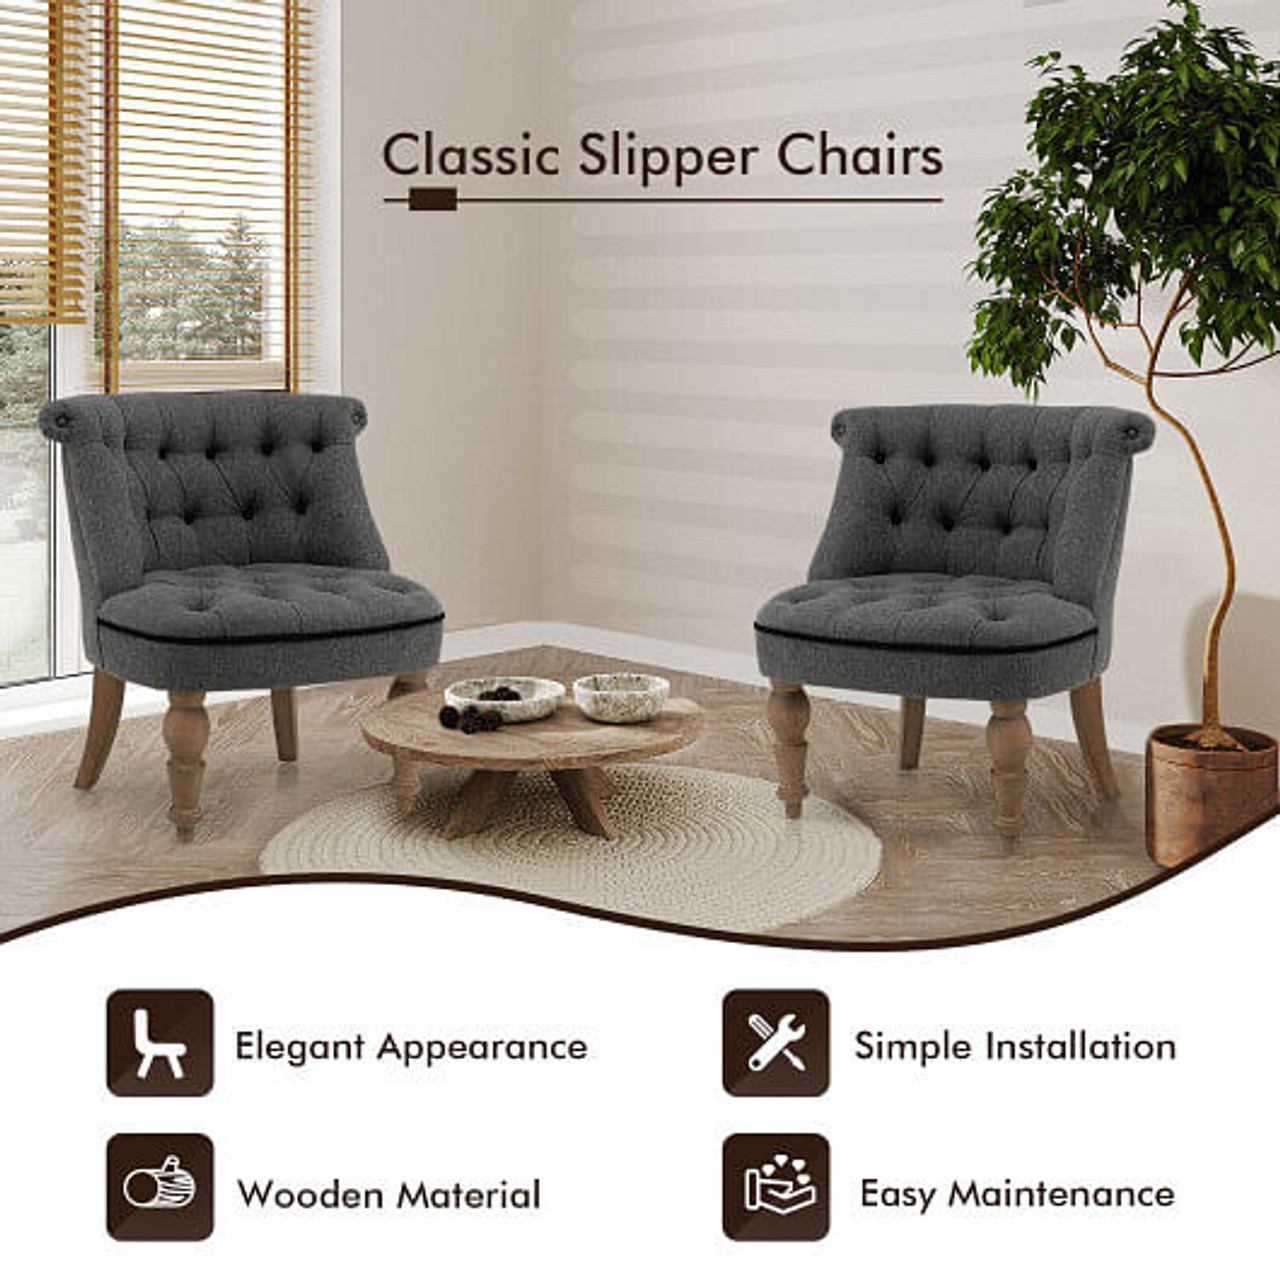 Set of 2 Upholstered Armless Slipper Chairs with Beech Wood Legs-Gray